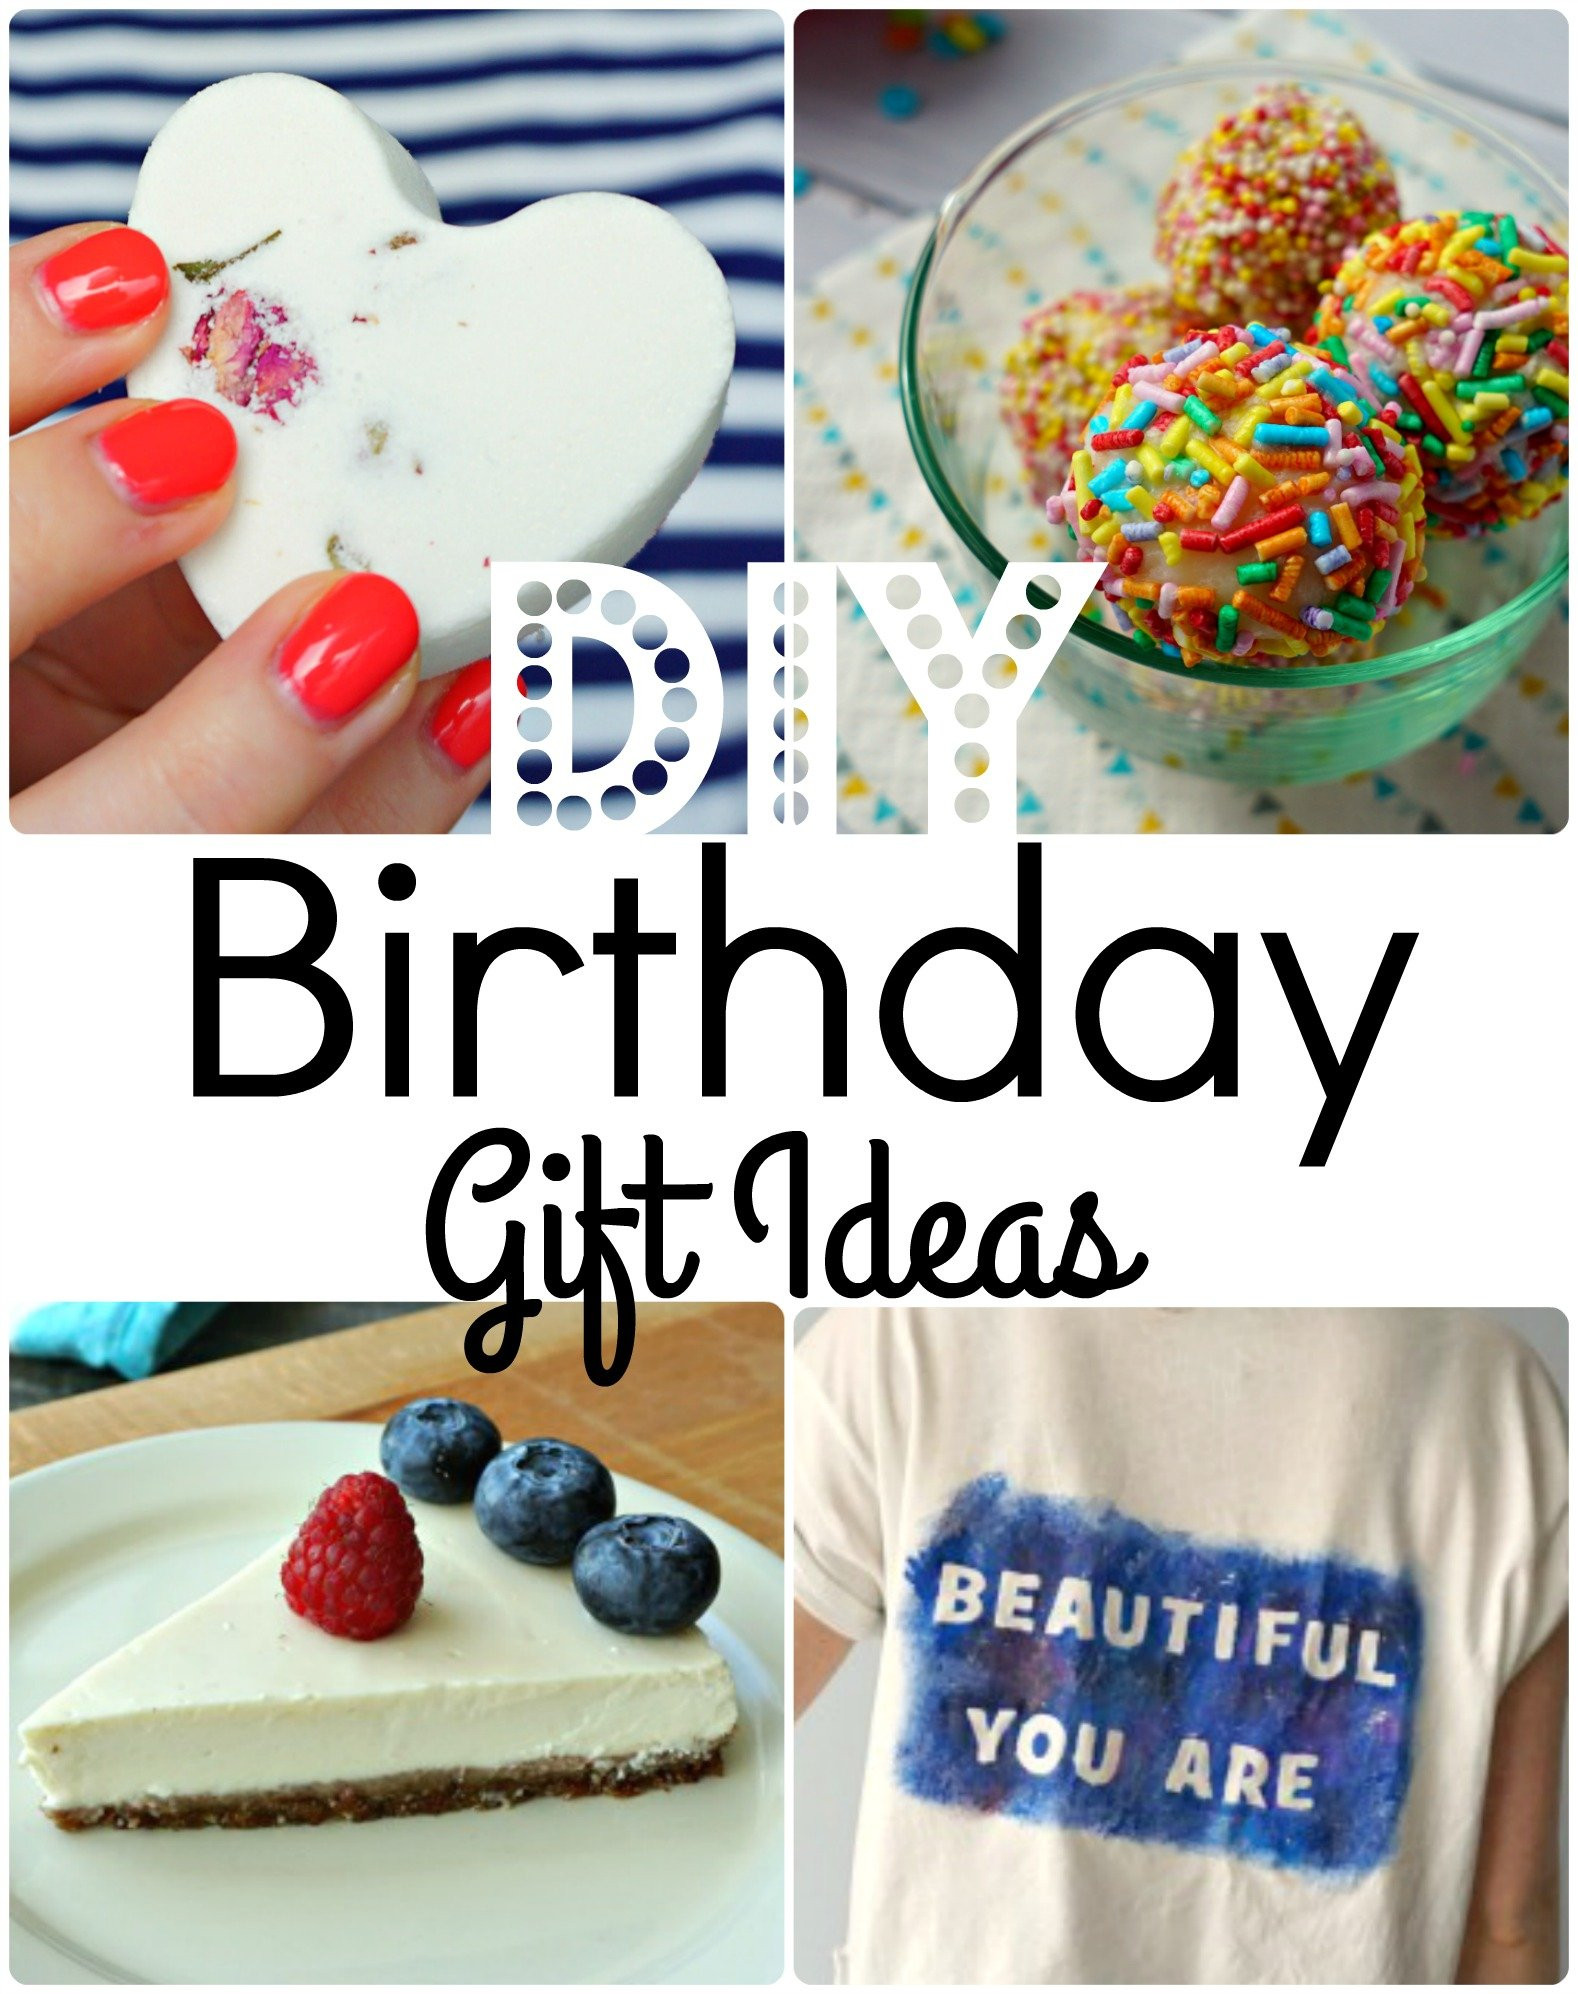 DIY Gifts For Birthday
 7 Easy DIY Birthday Gift Ideas that are always a hit The